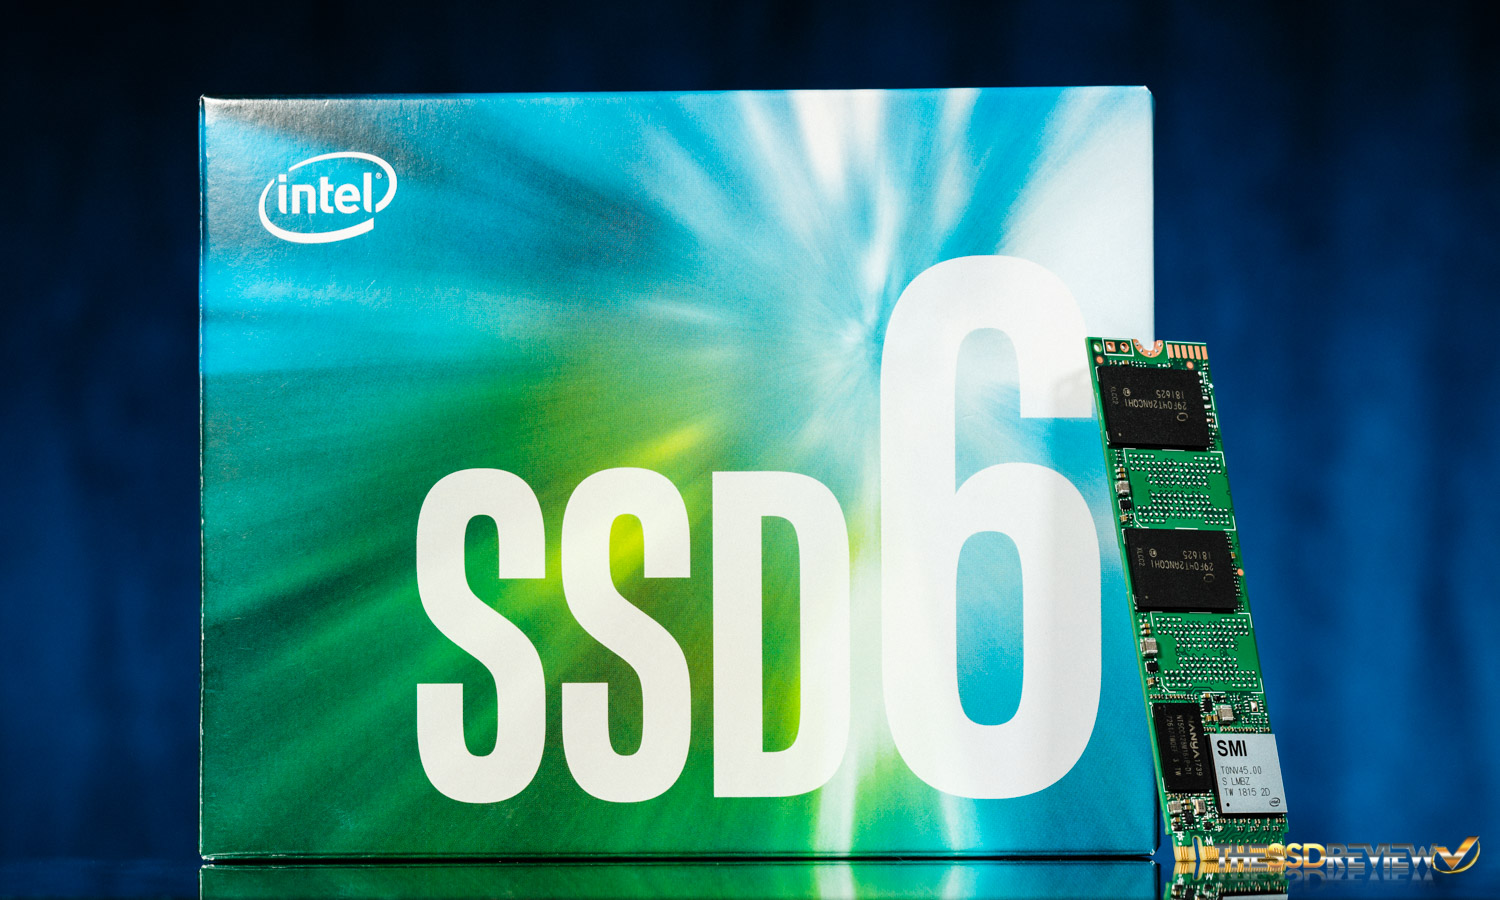 Intel SSD 660P NVMe Review (1TB) The Review